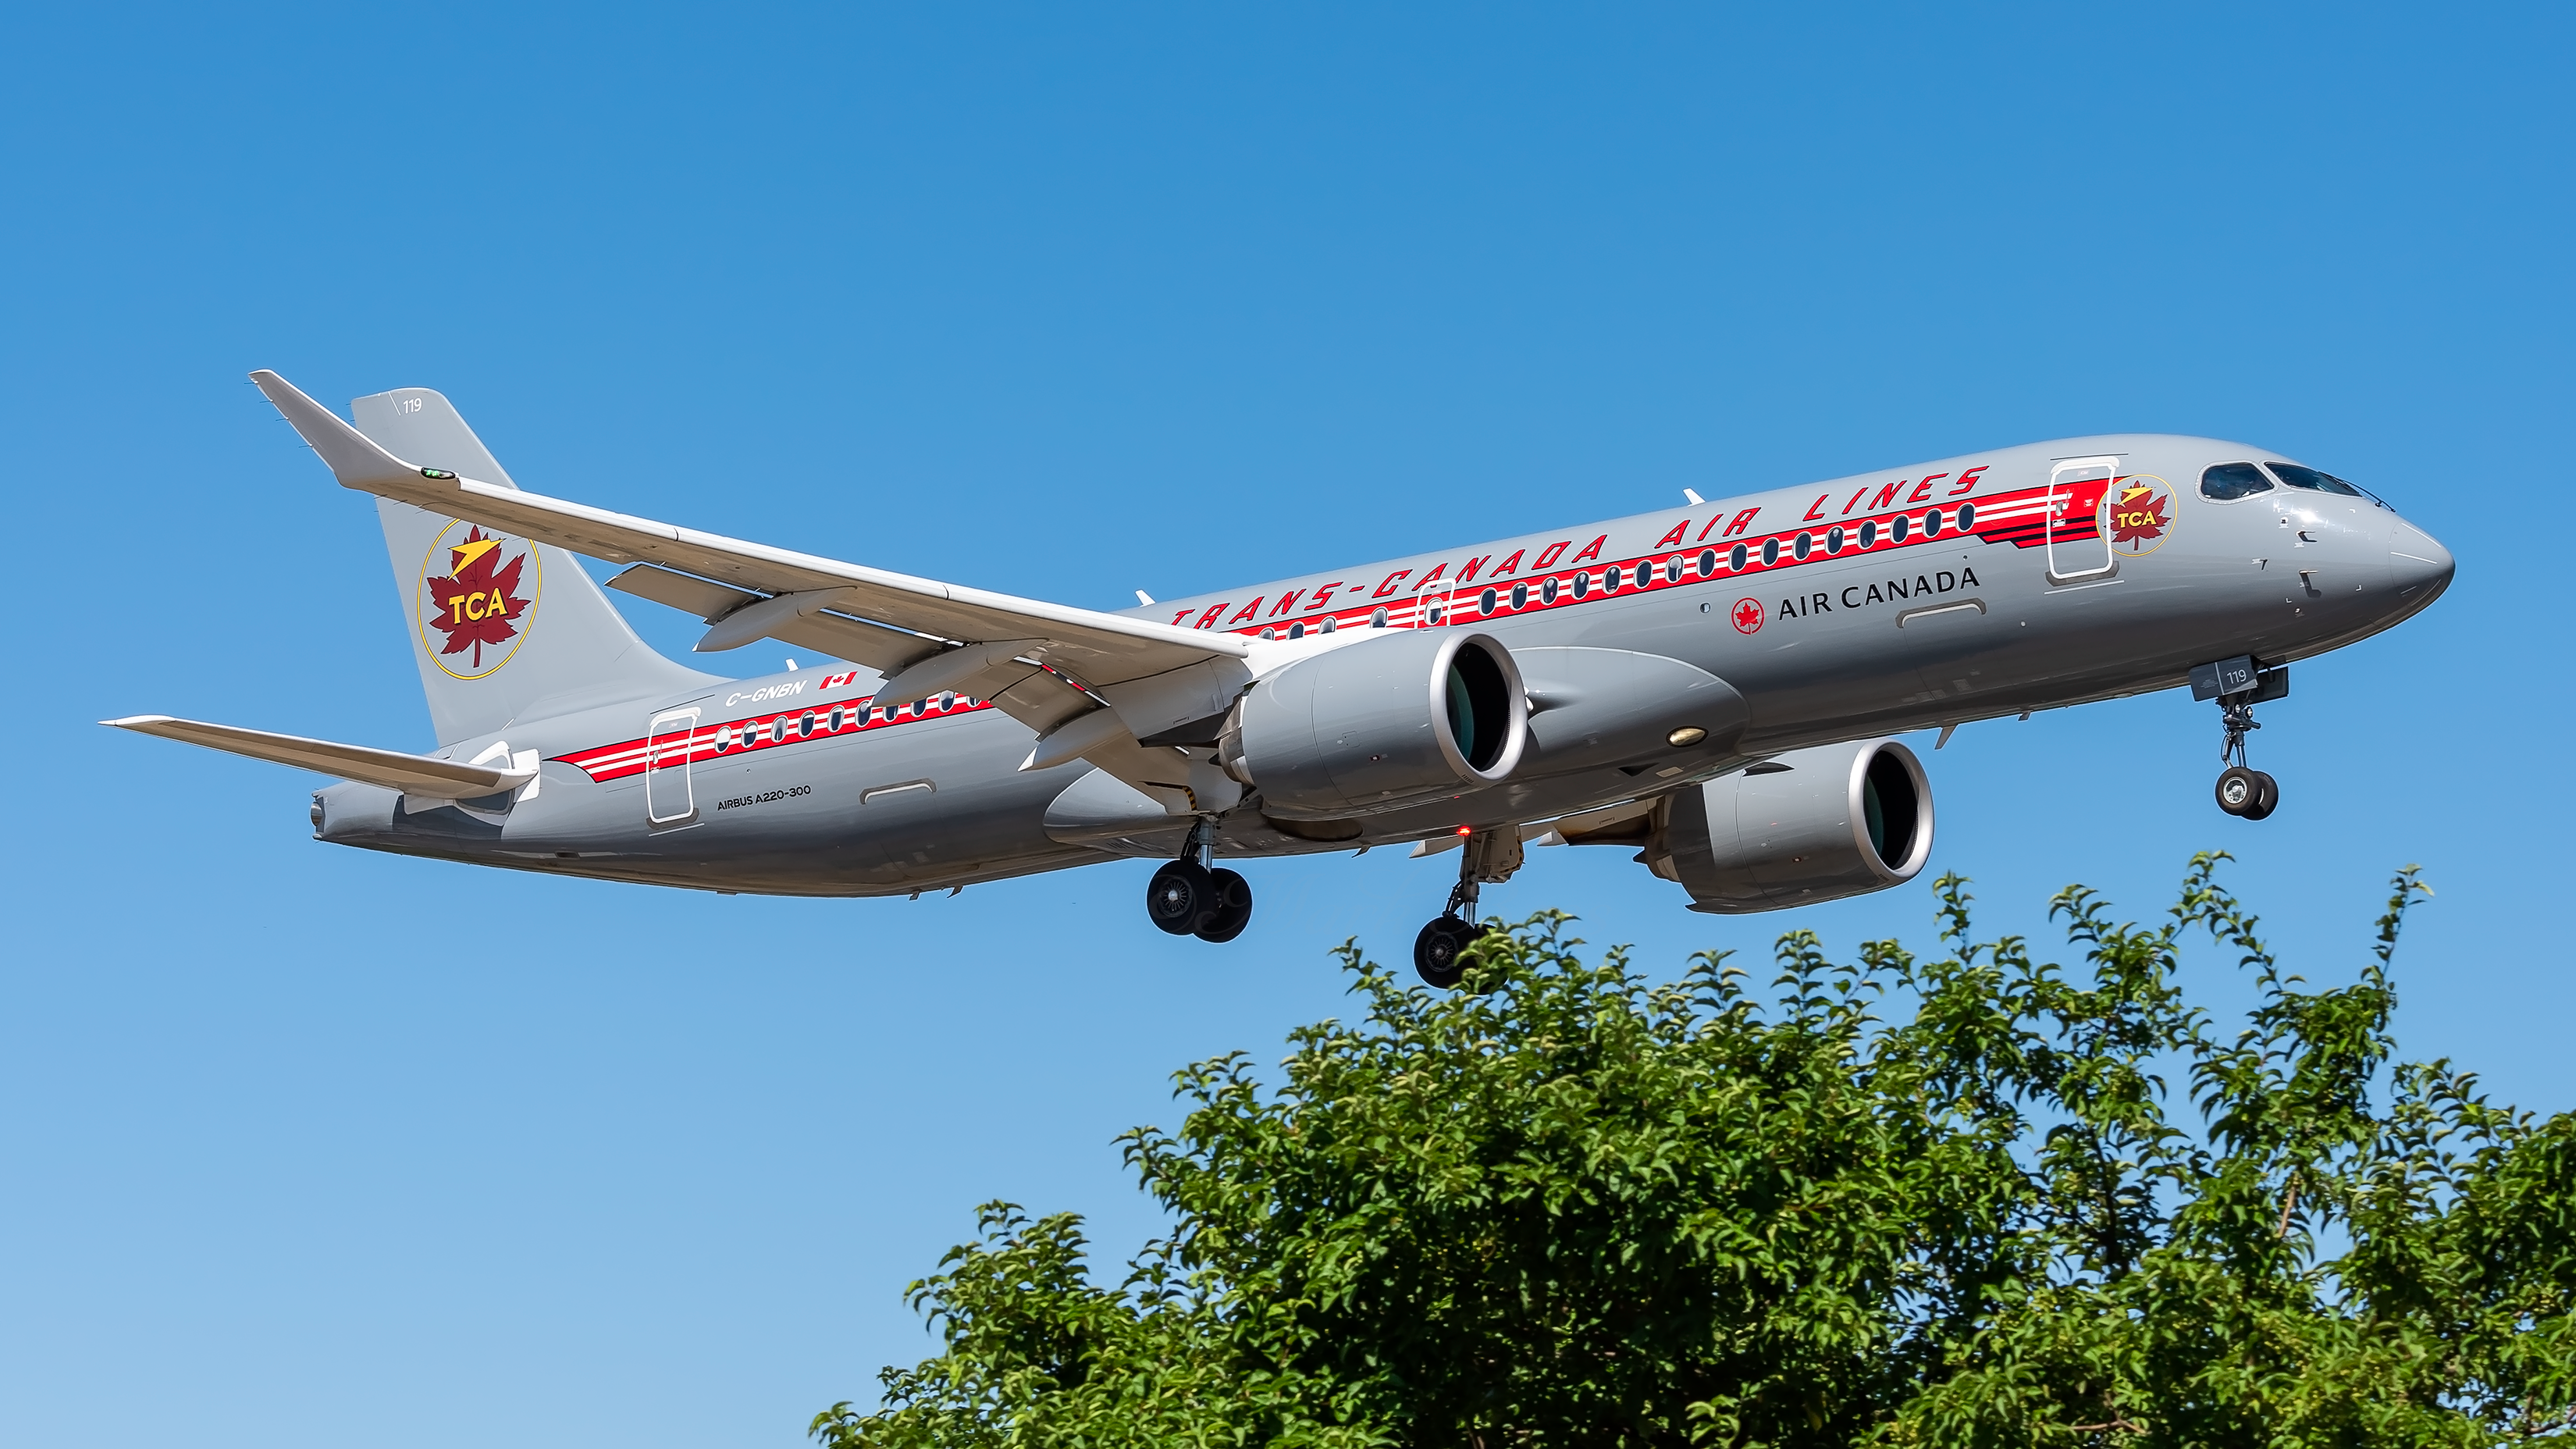 An Air Canada A220 in retro livery flying in the sky.